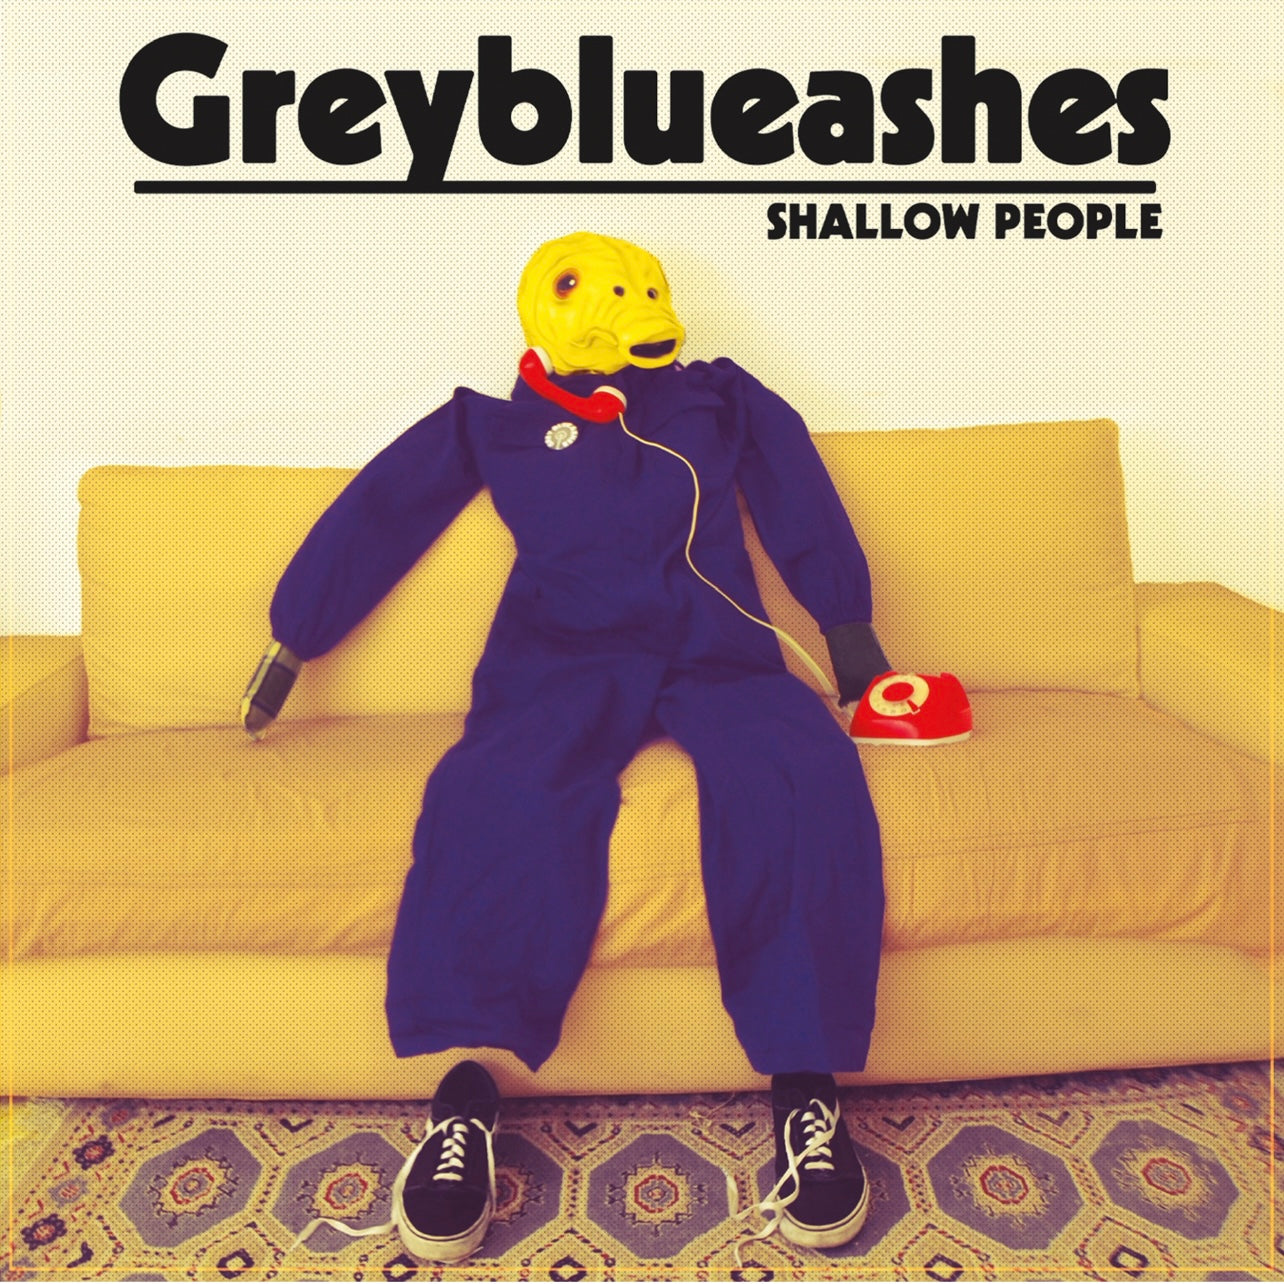 OMR-063 Greyblueashes “Shallow People” LP